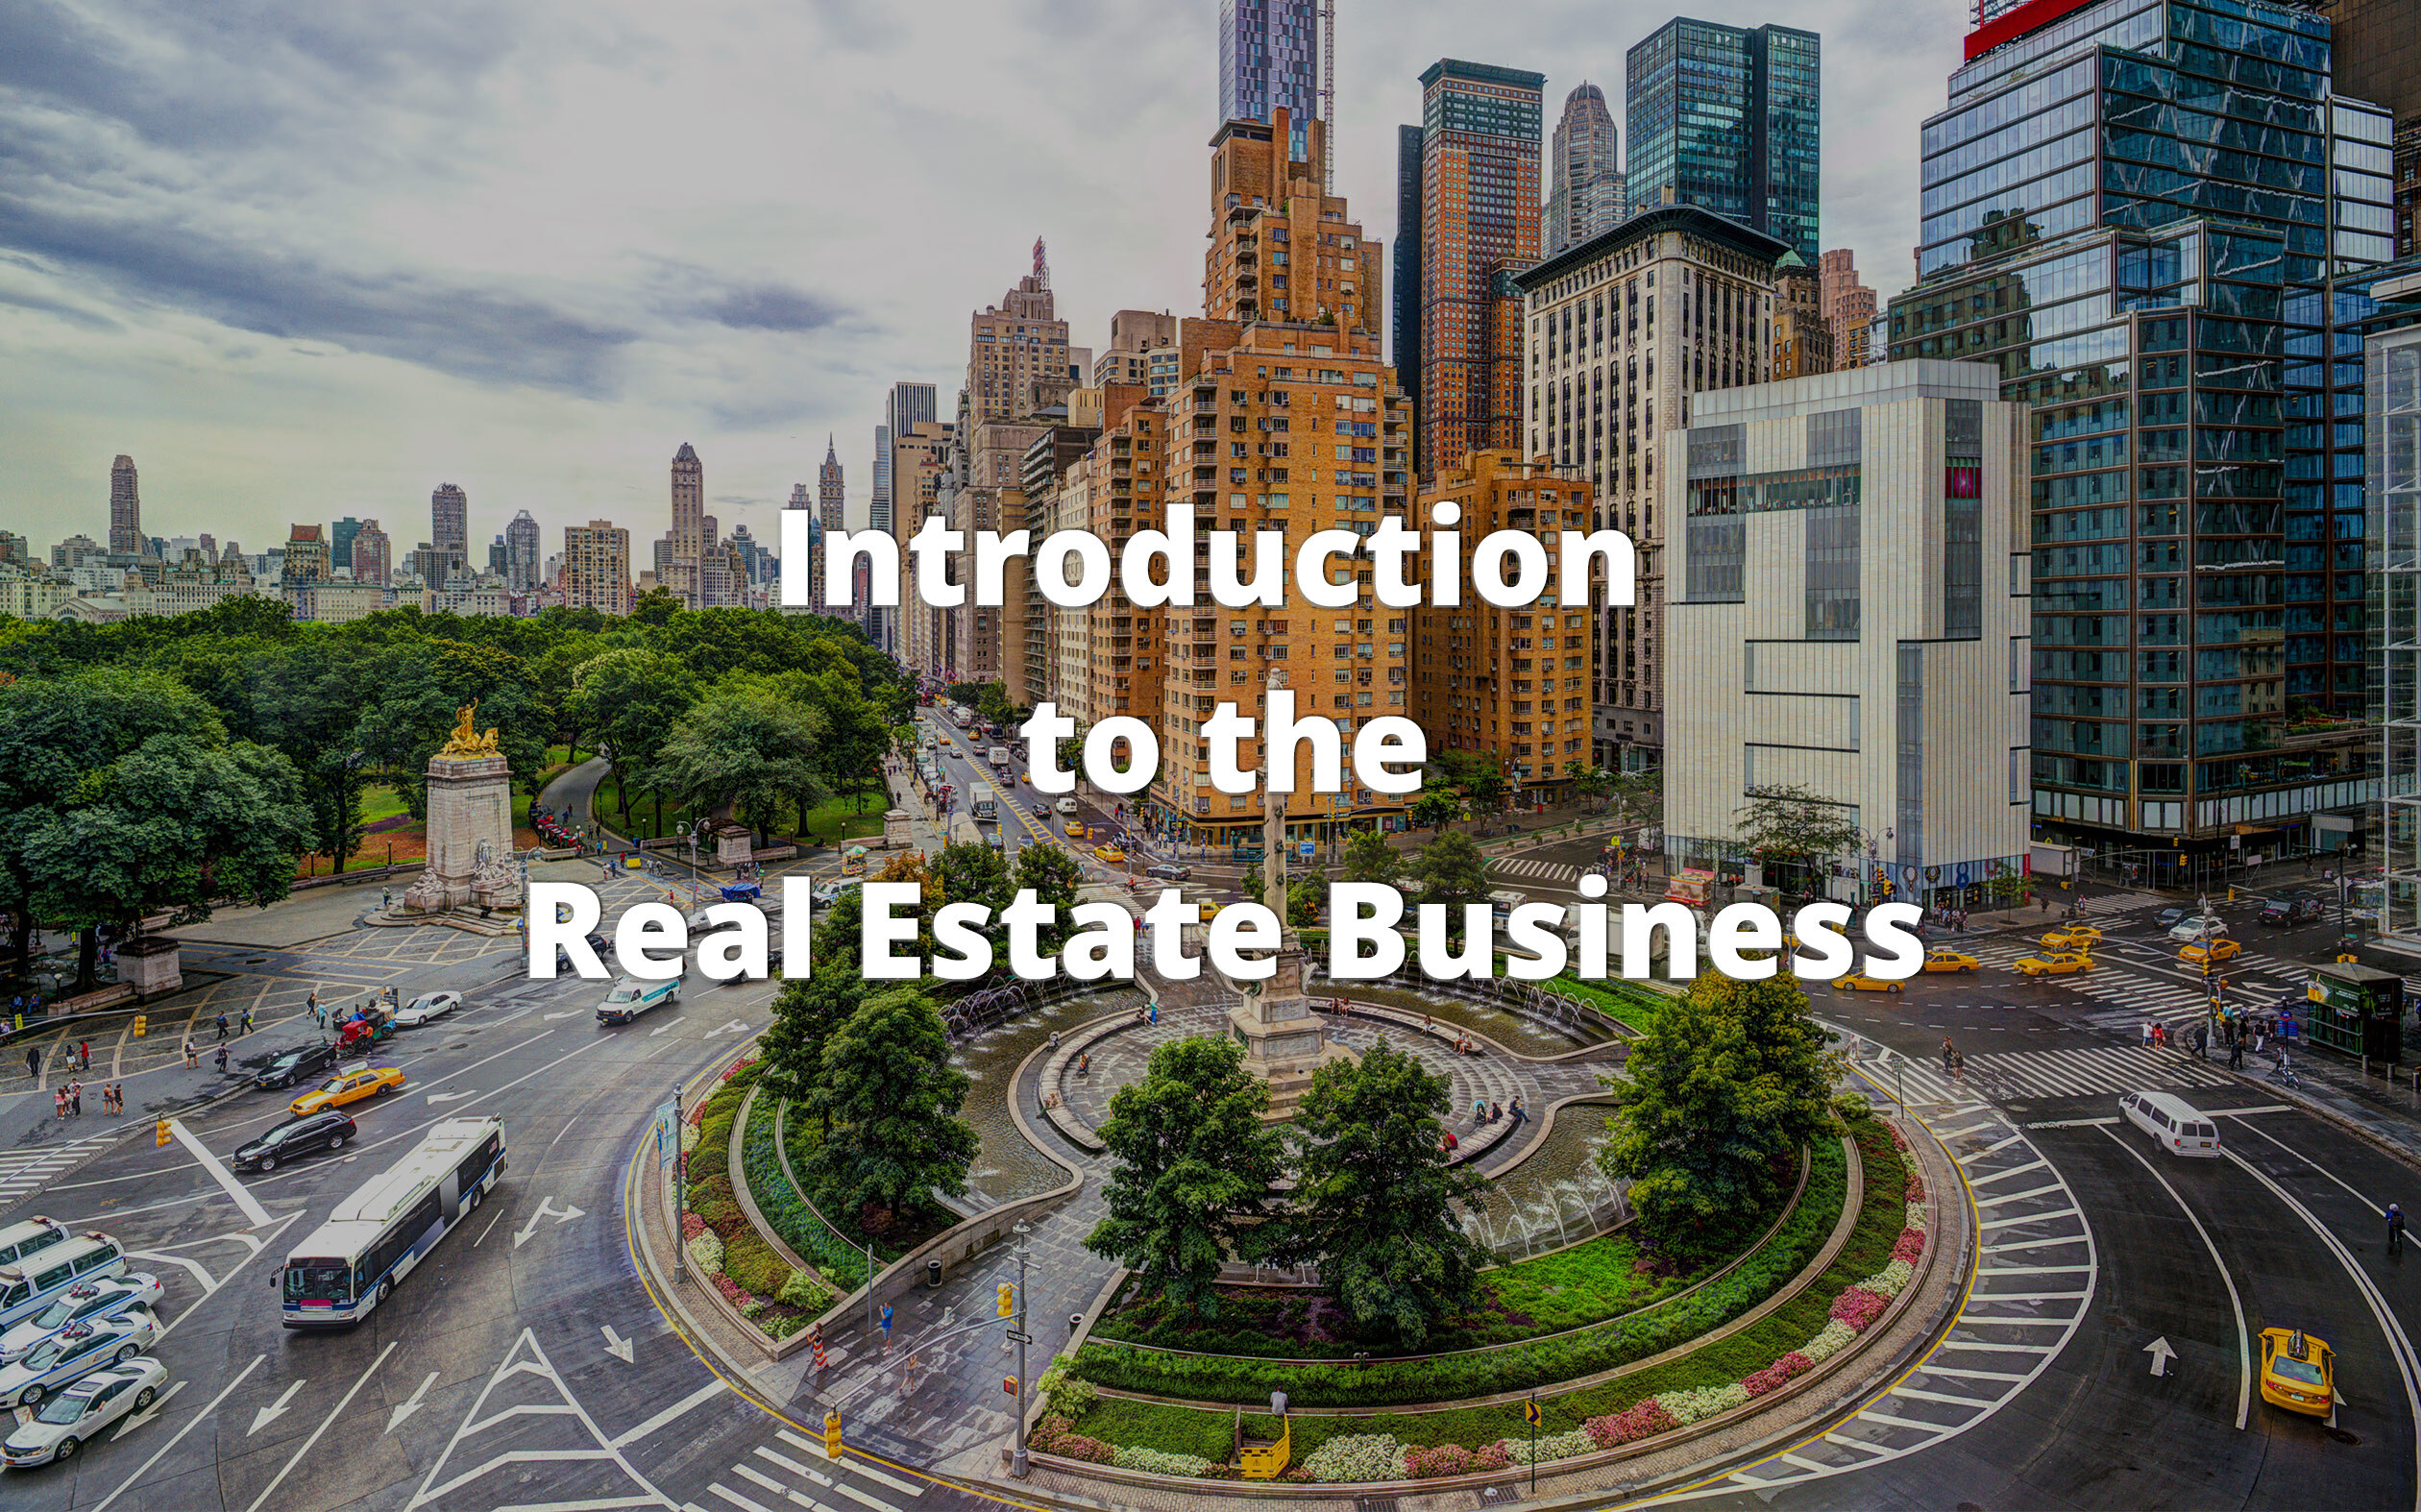 Introduction to the Real Estate Business